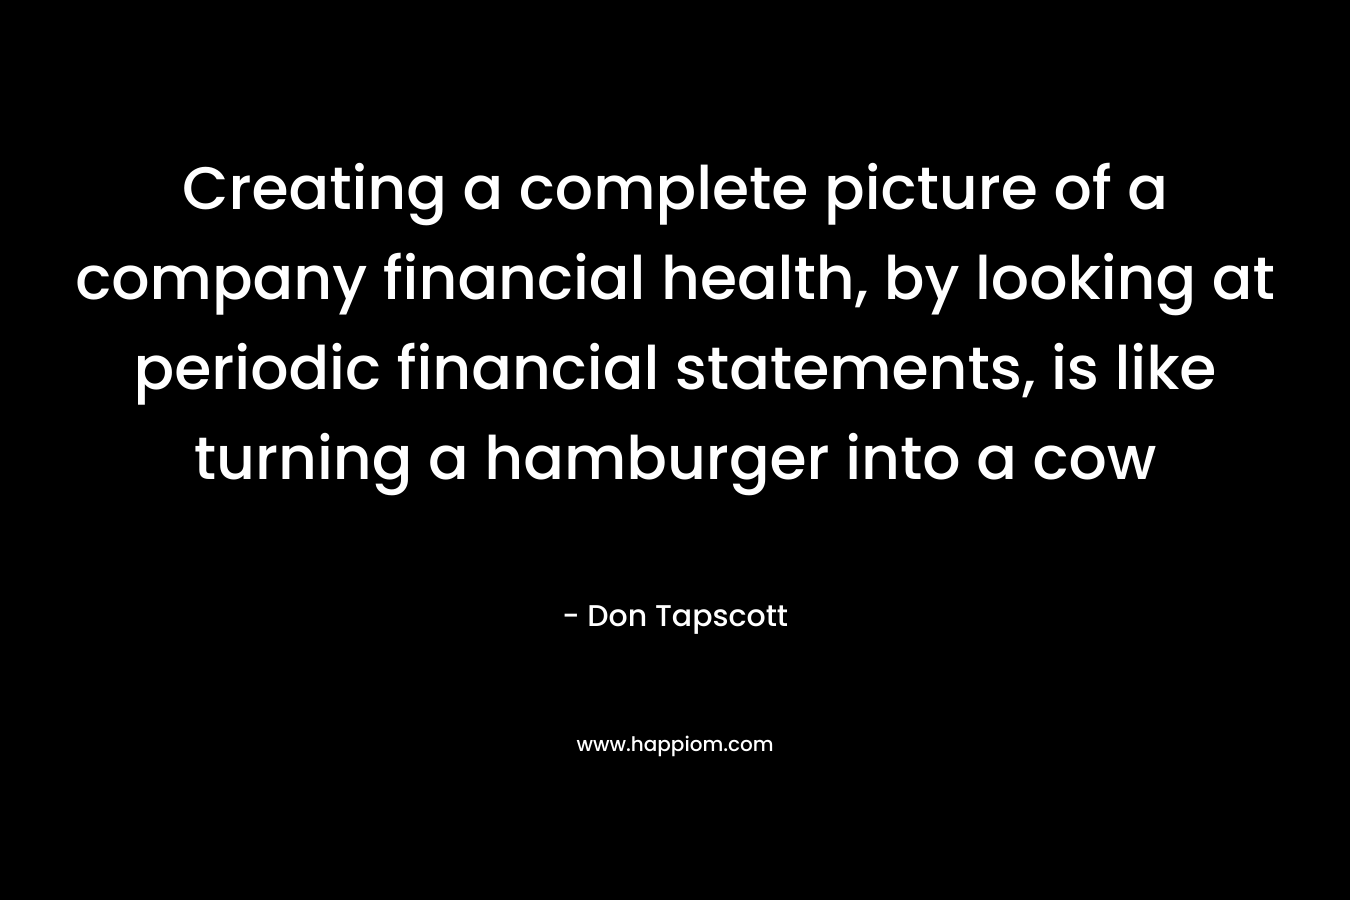 Creating a complete picture of a company financial health, by looking at periodic financial statements, is like turning a hamburger into a cow – Don Tapscott